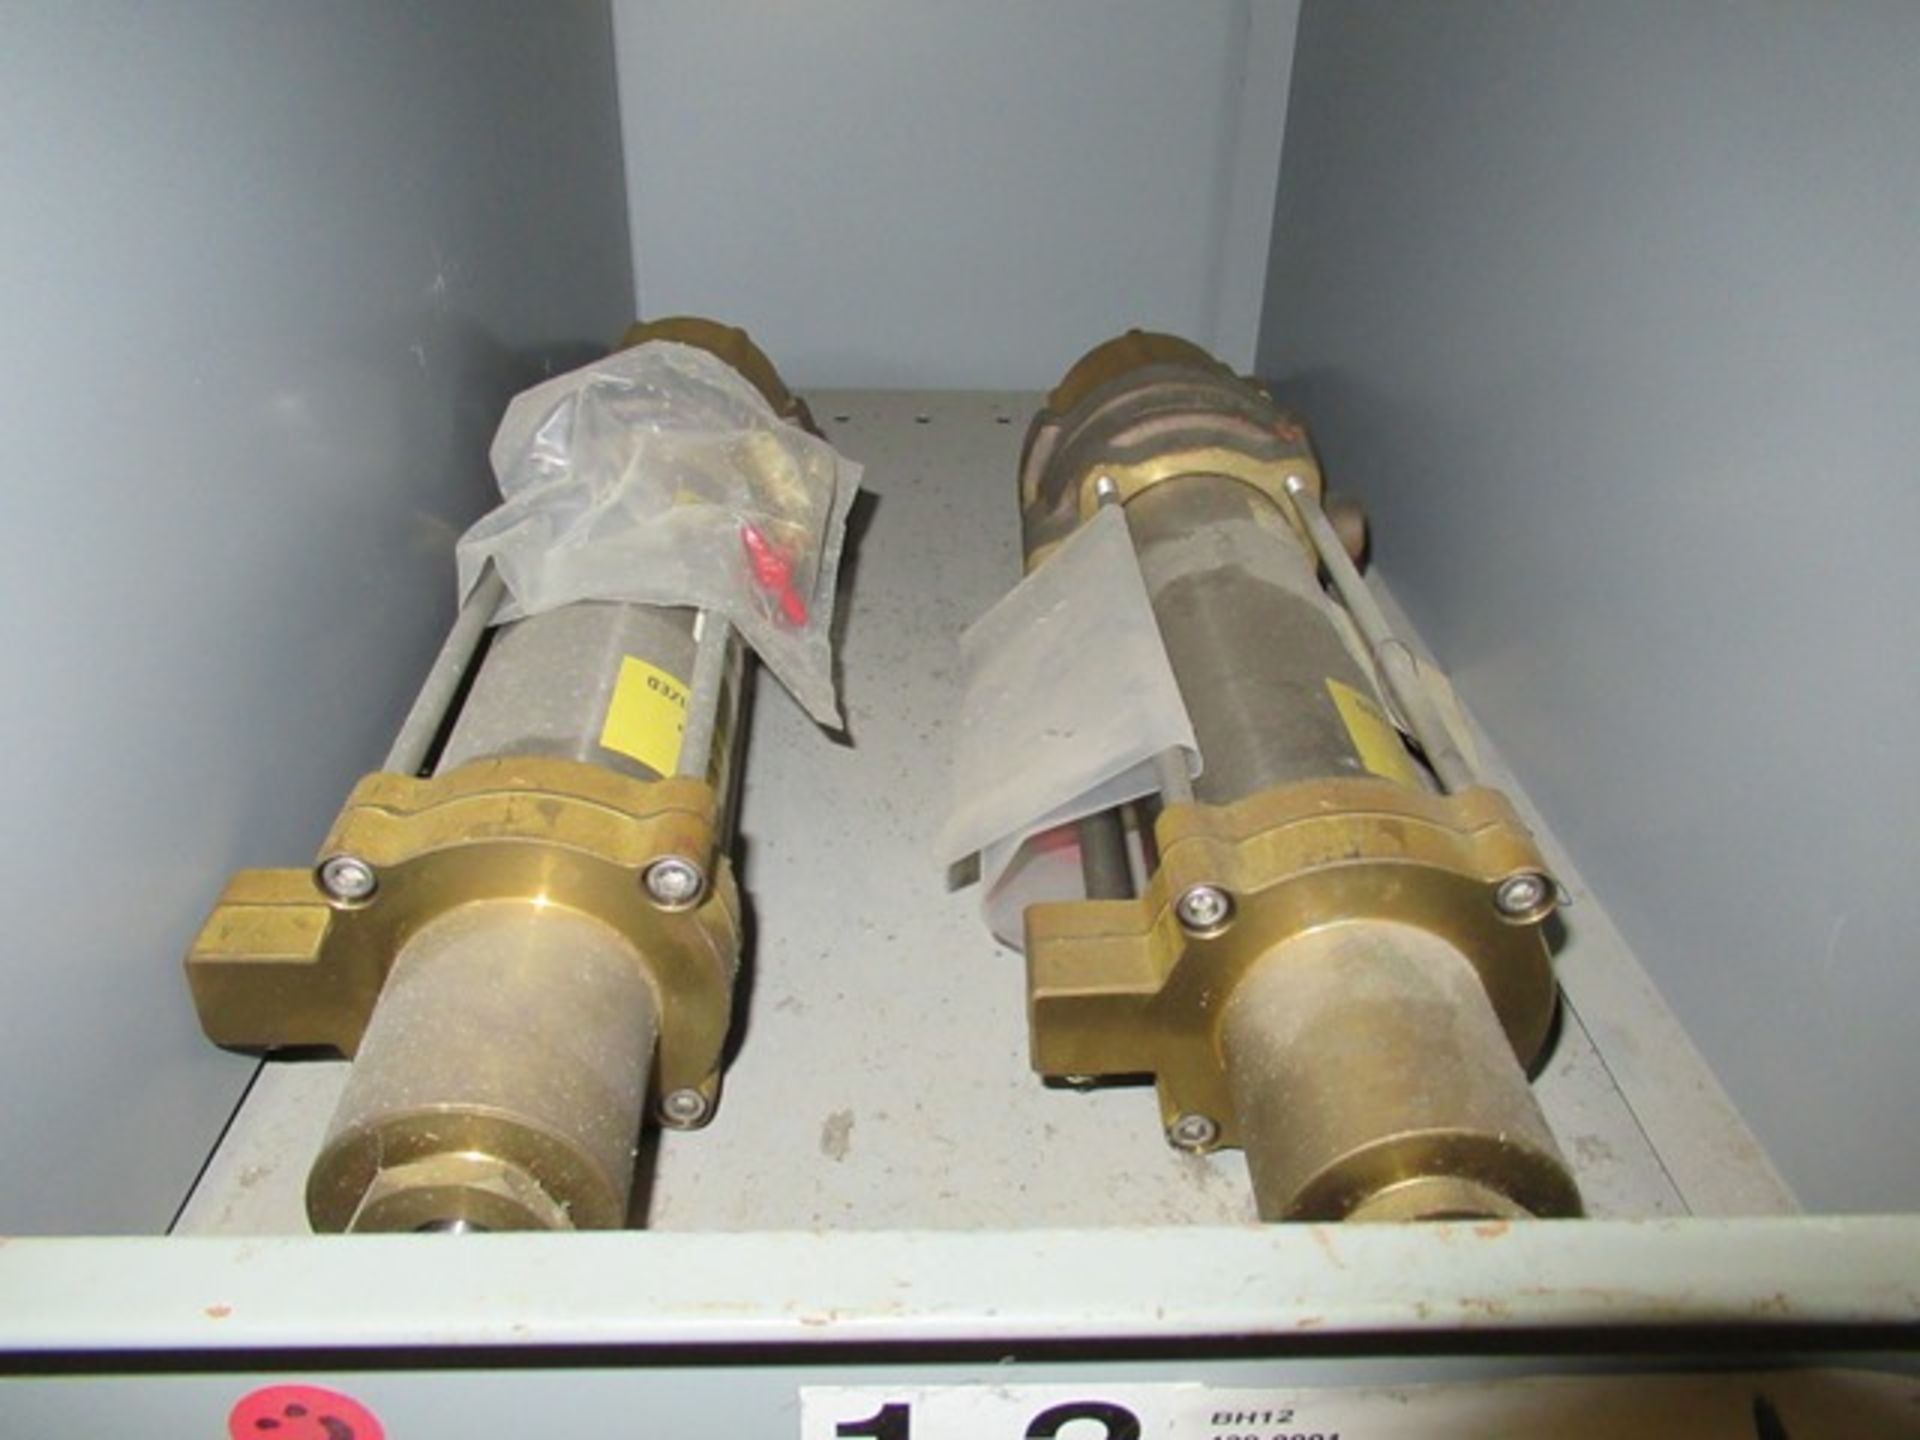 LOT ASST. BLACK CLAWSON PARTS, PRESSURE SWITCHES, FISHER ELECTRICAL PARTS, ETC. 2-SECTIONS OF - Image 5 of 5